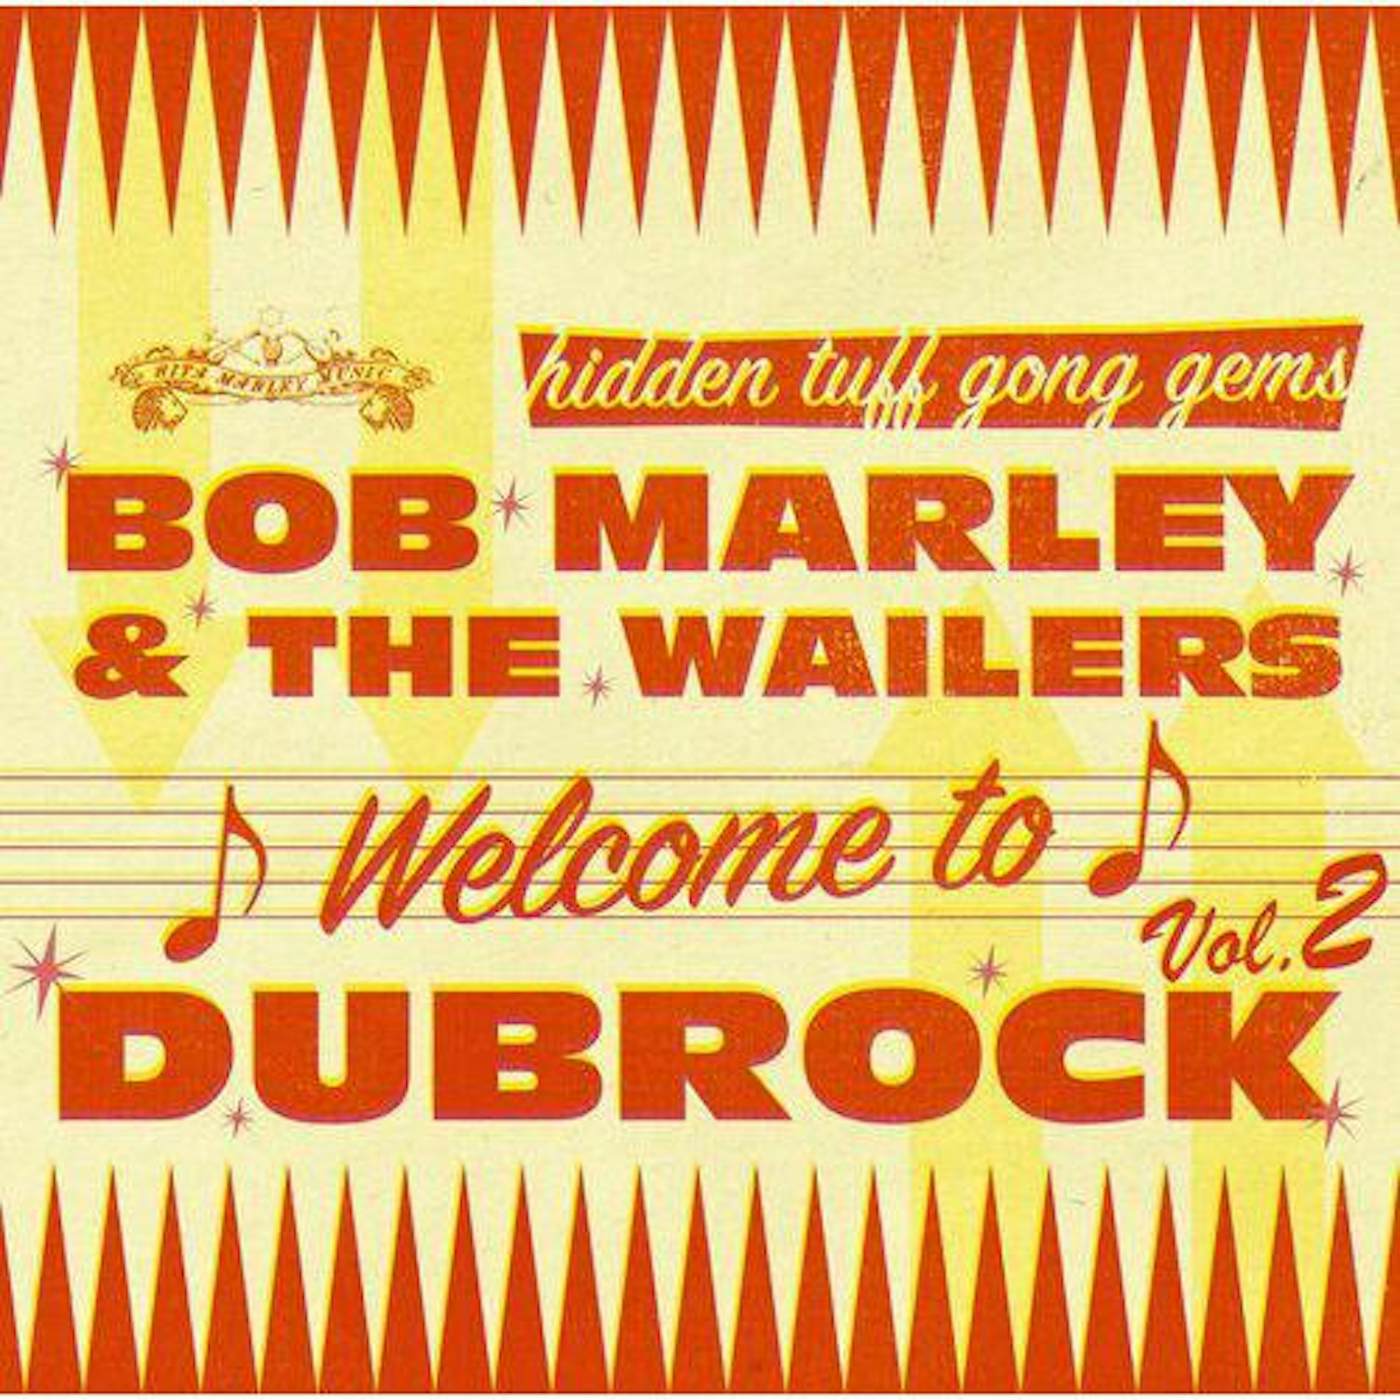 Bob Marley & The Wailers Welcome To Dubrock 2 Vinyl Record